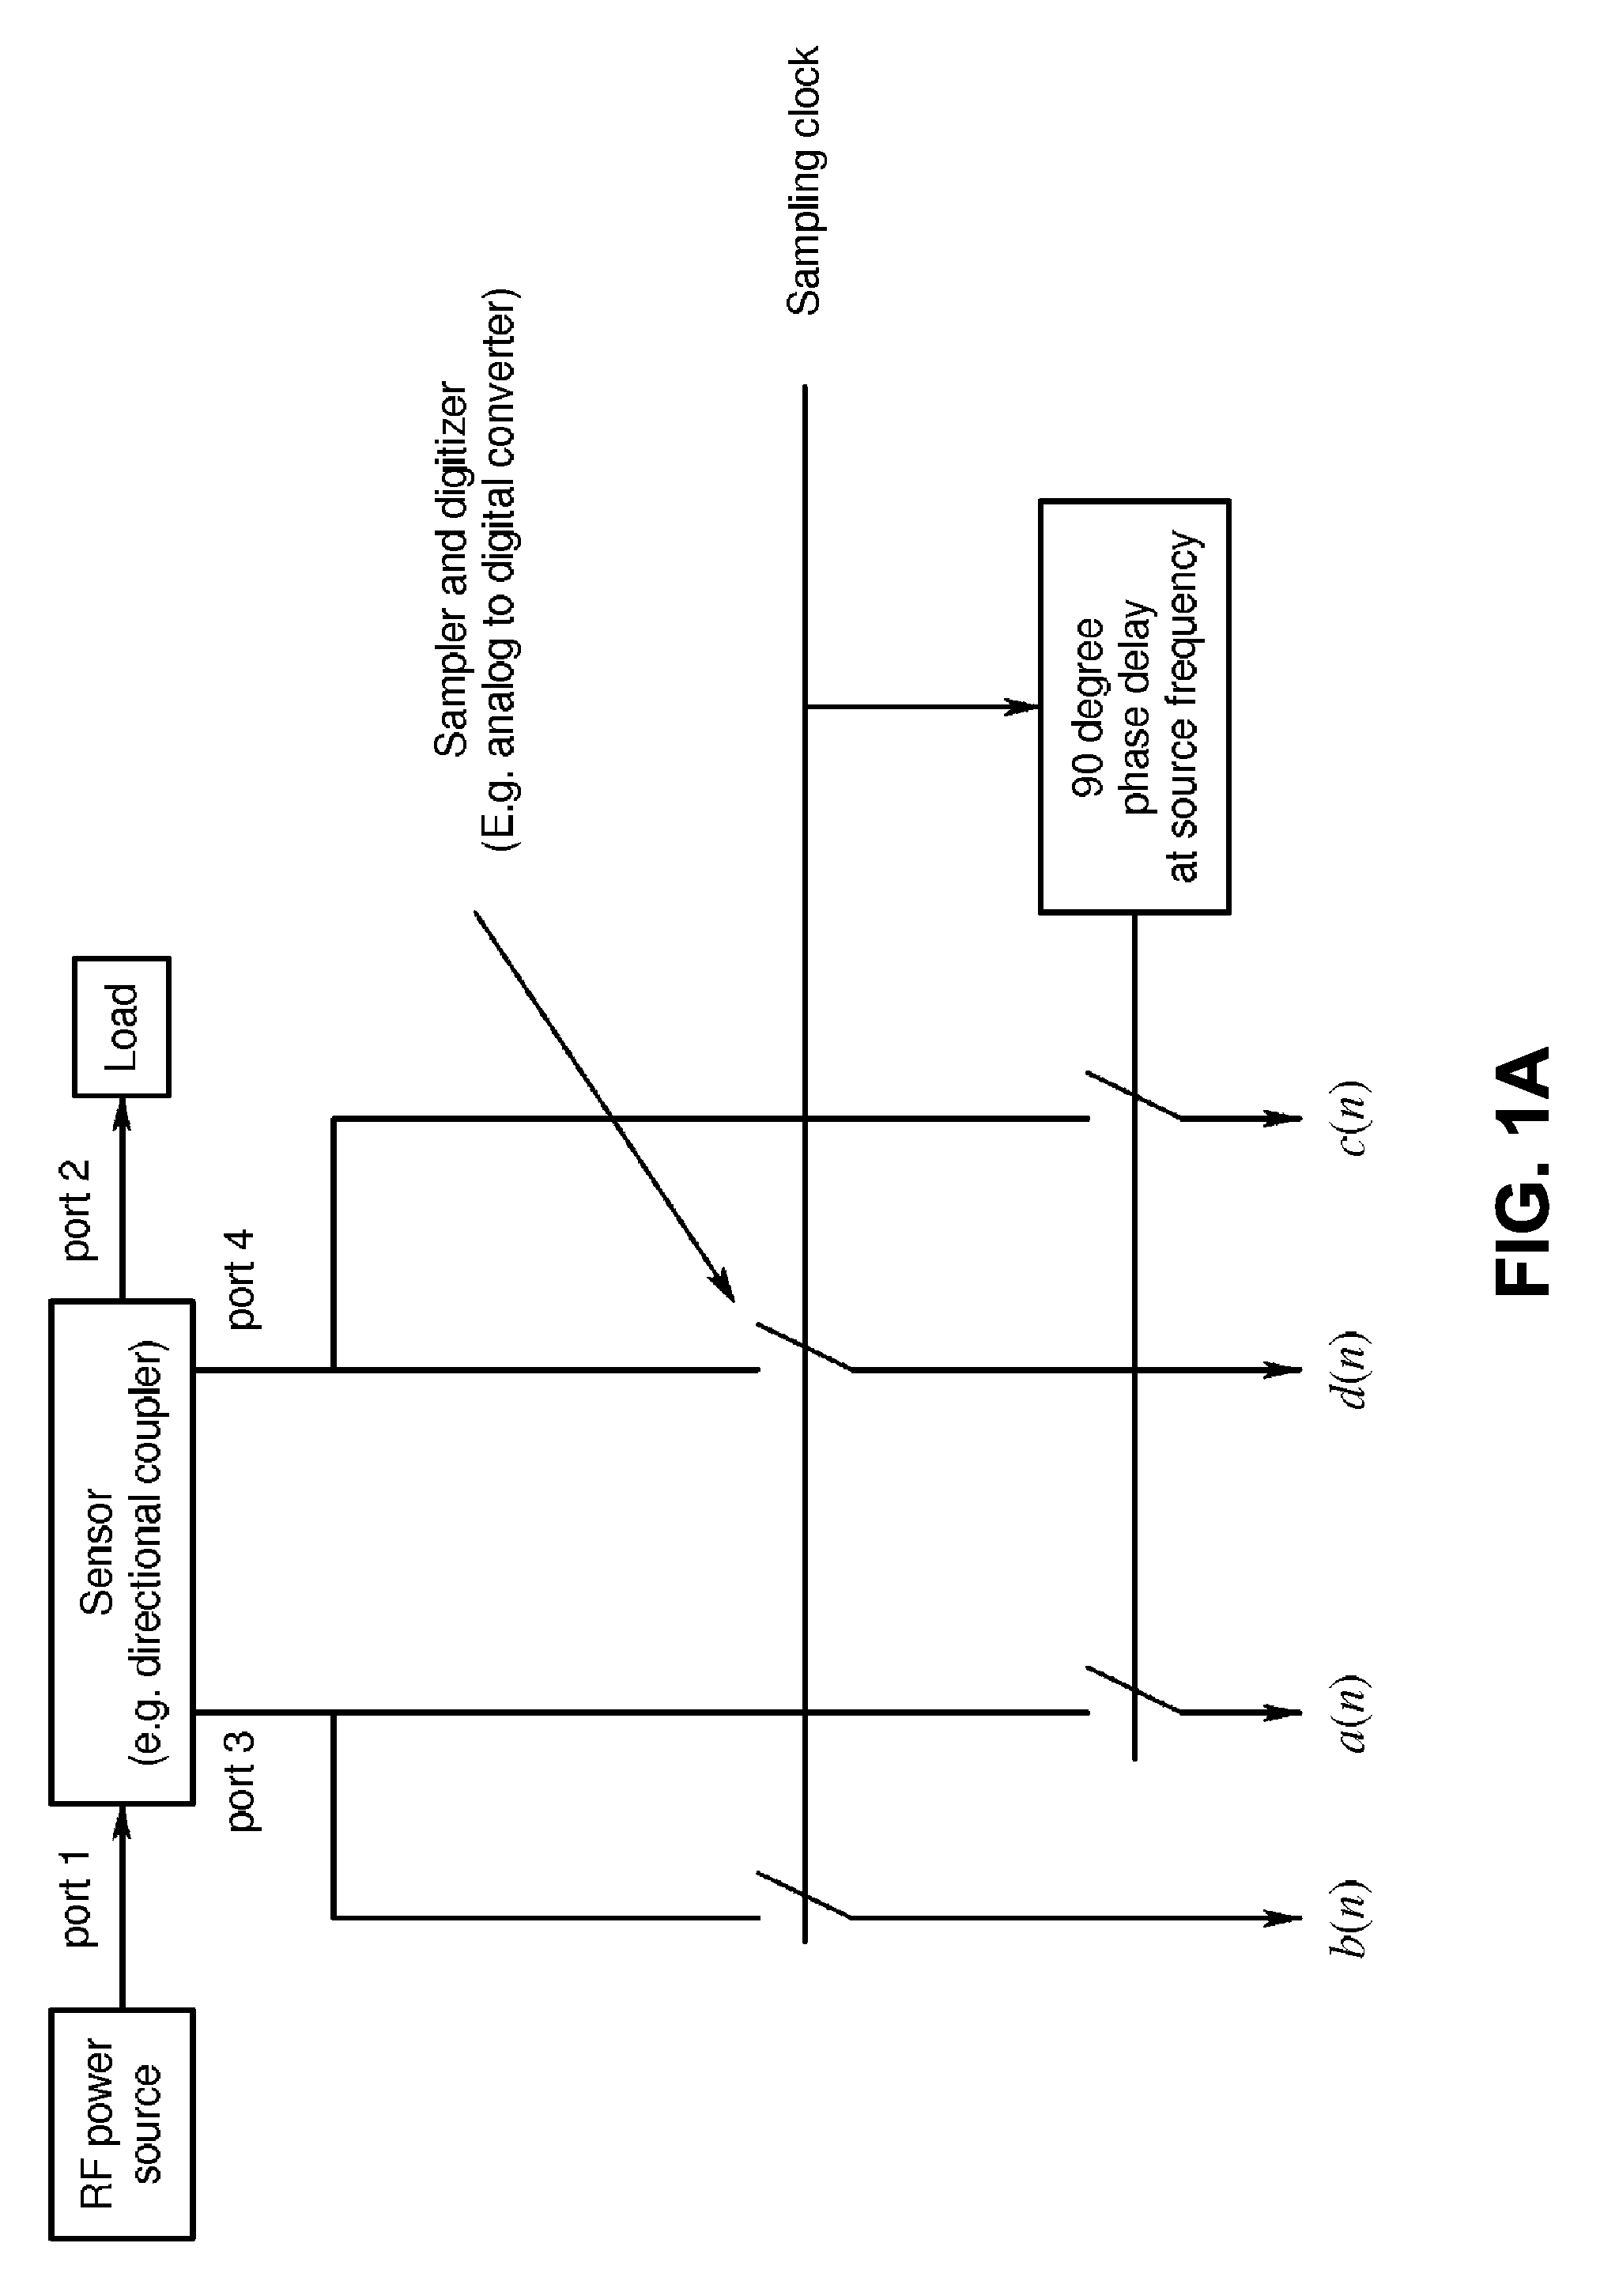 System, method, and apparatus for monitoring power